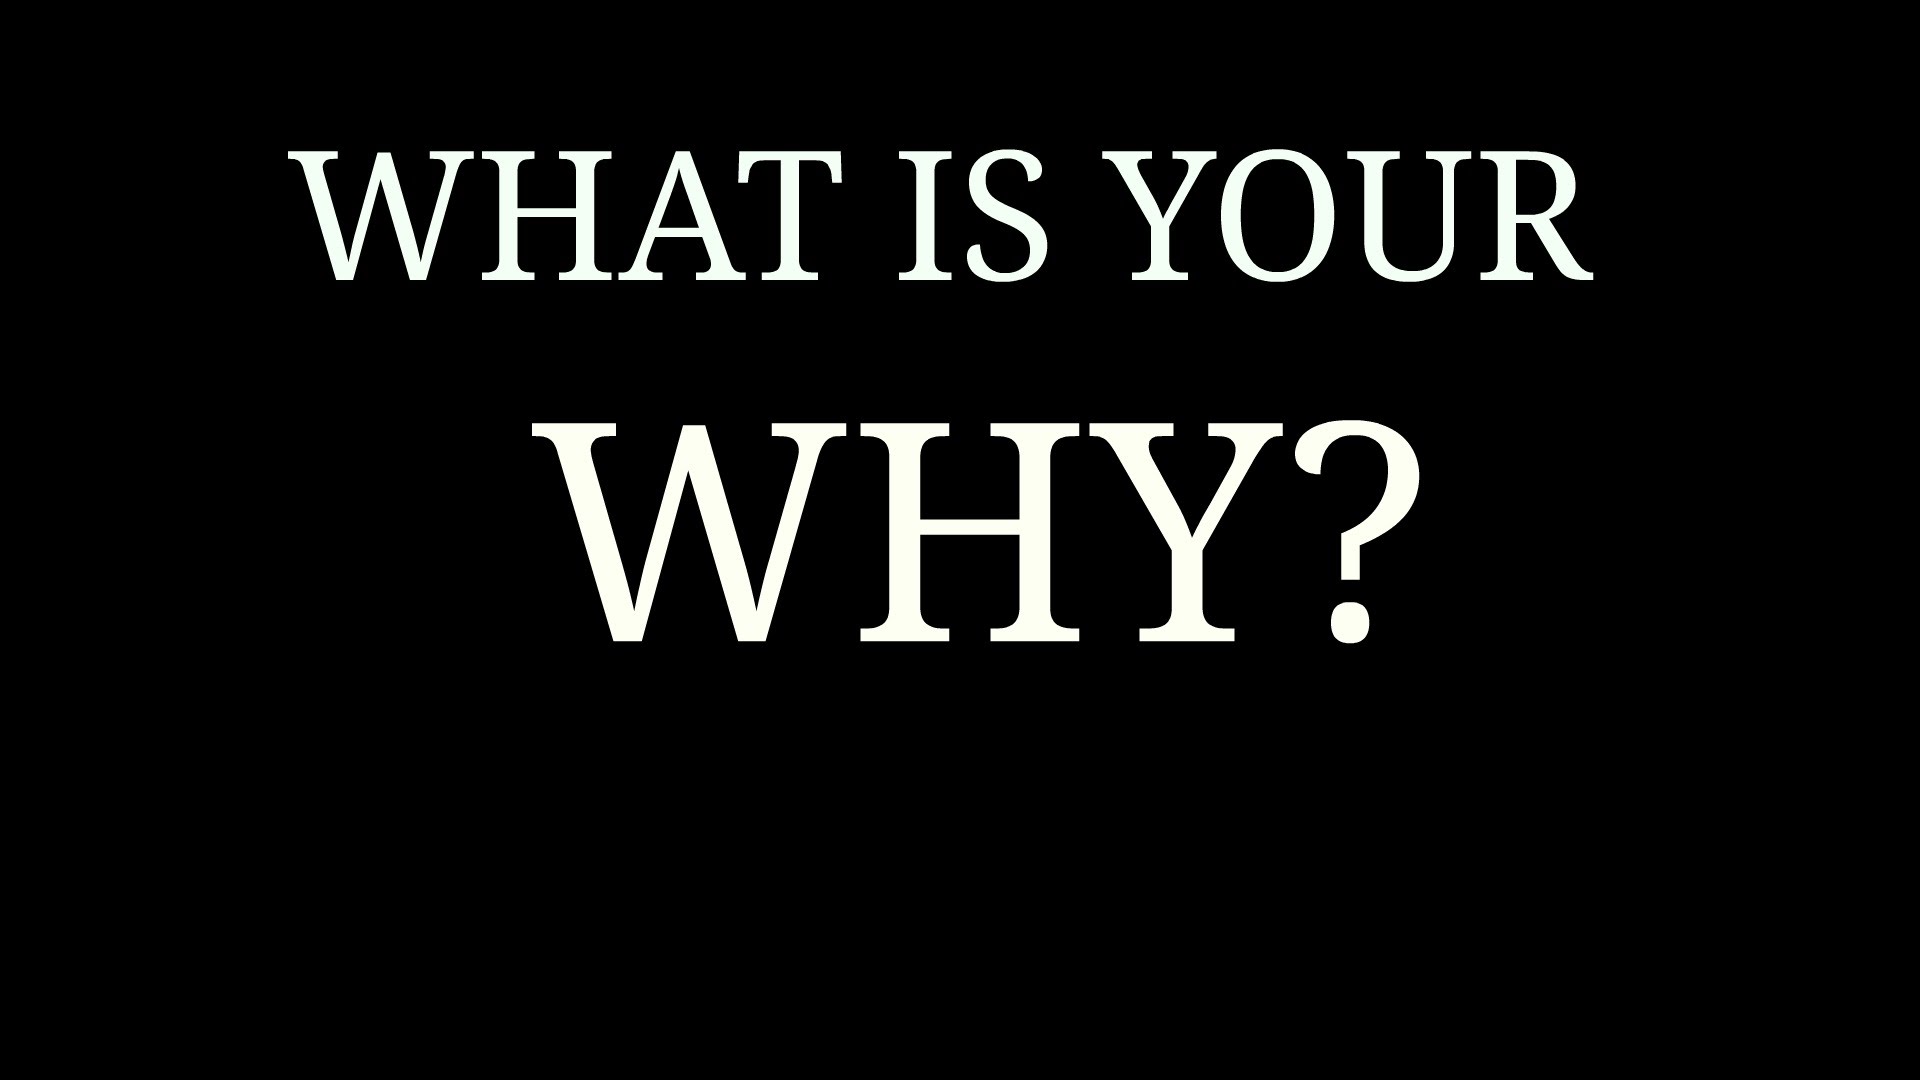 Why is the most important question. What is your why?